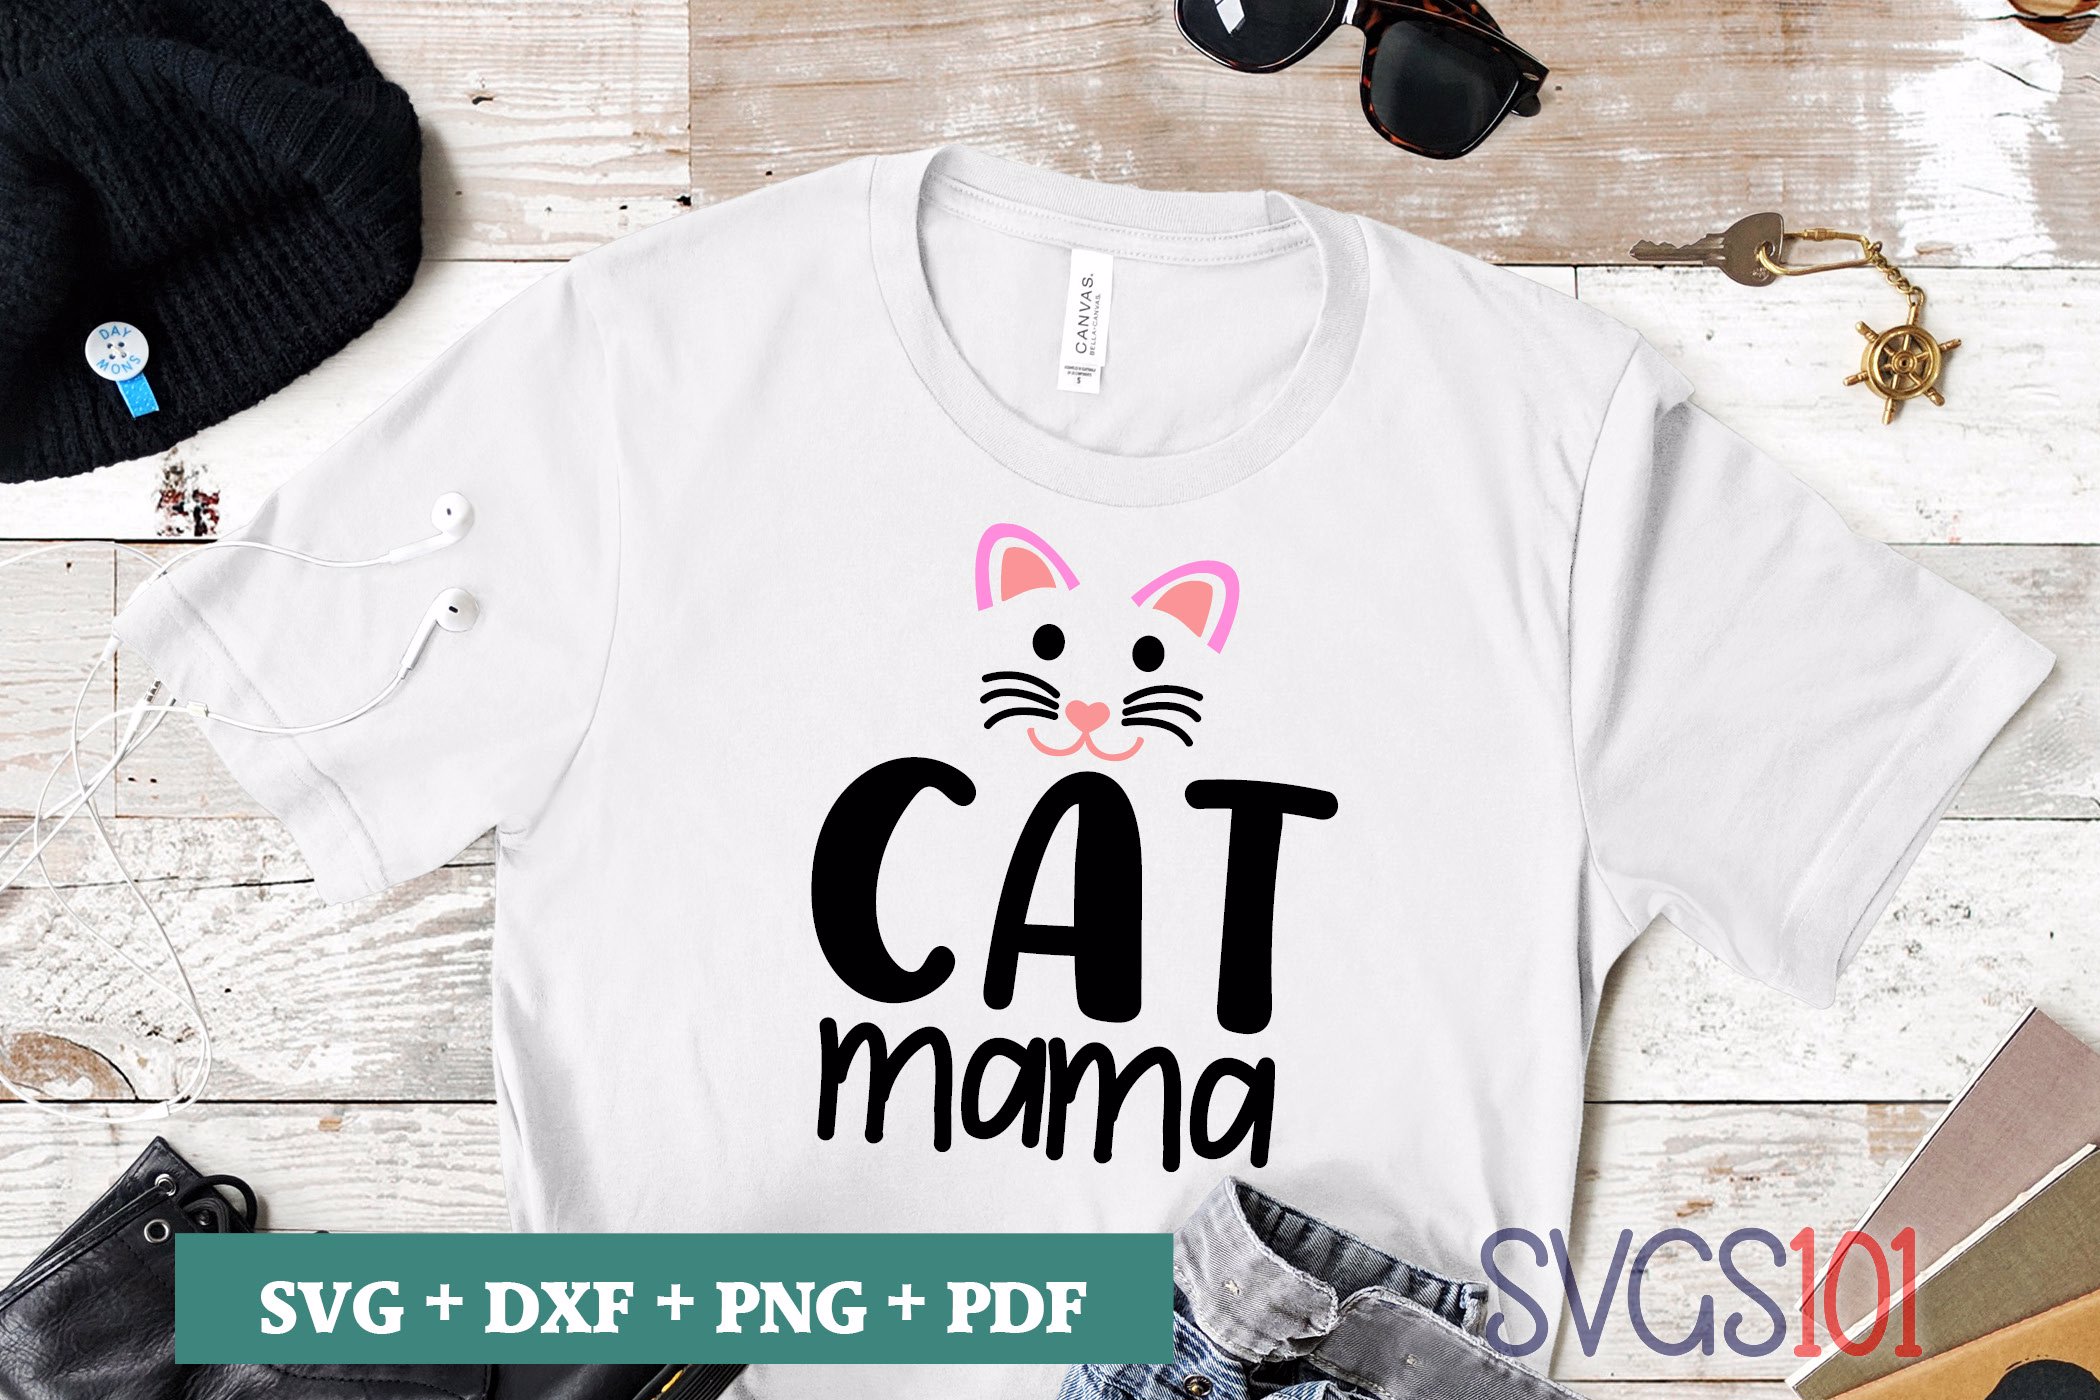 Cat Mama SVG Cuttable file - DXF, EPS, PNG, PDF | SVG Cutting File